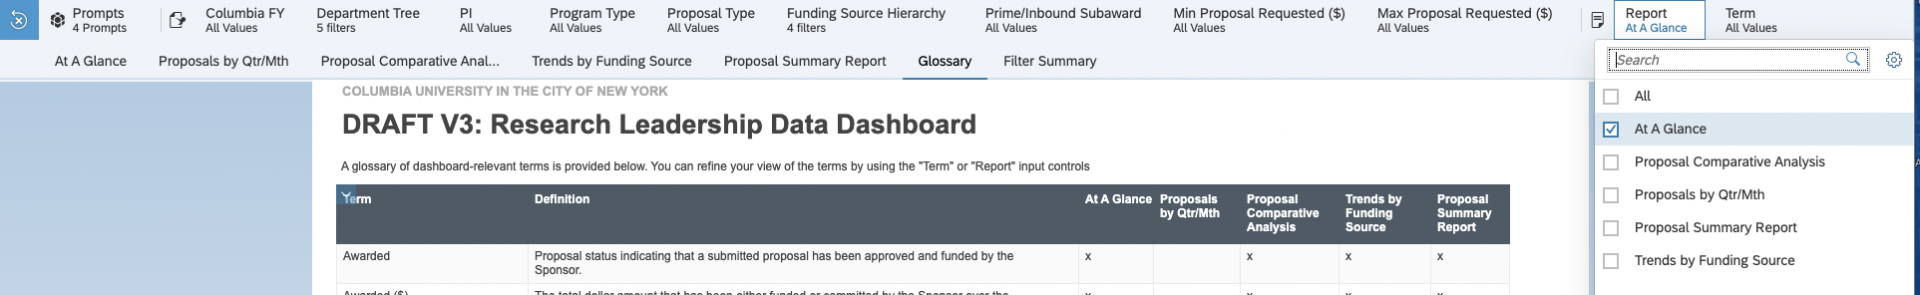 View of the top of the research leadership data dashboard, showing the navigation toolbars with Report input control at the far-right of the filter bar expanded.